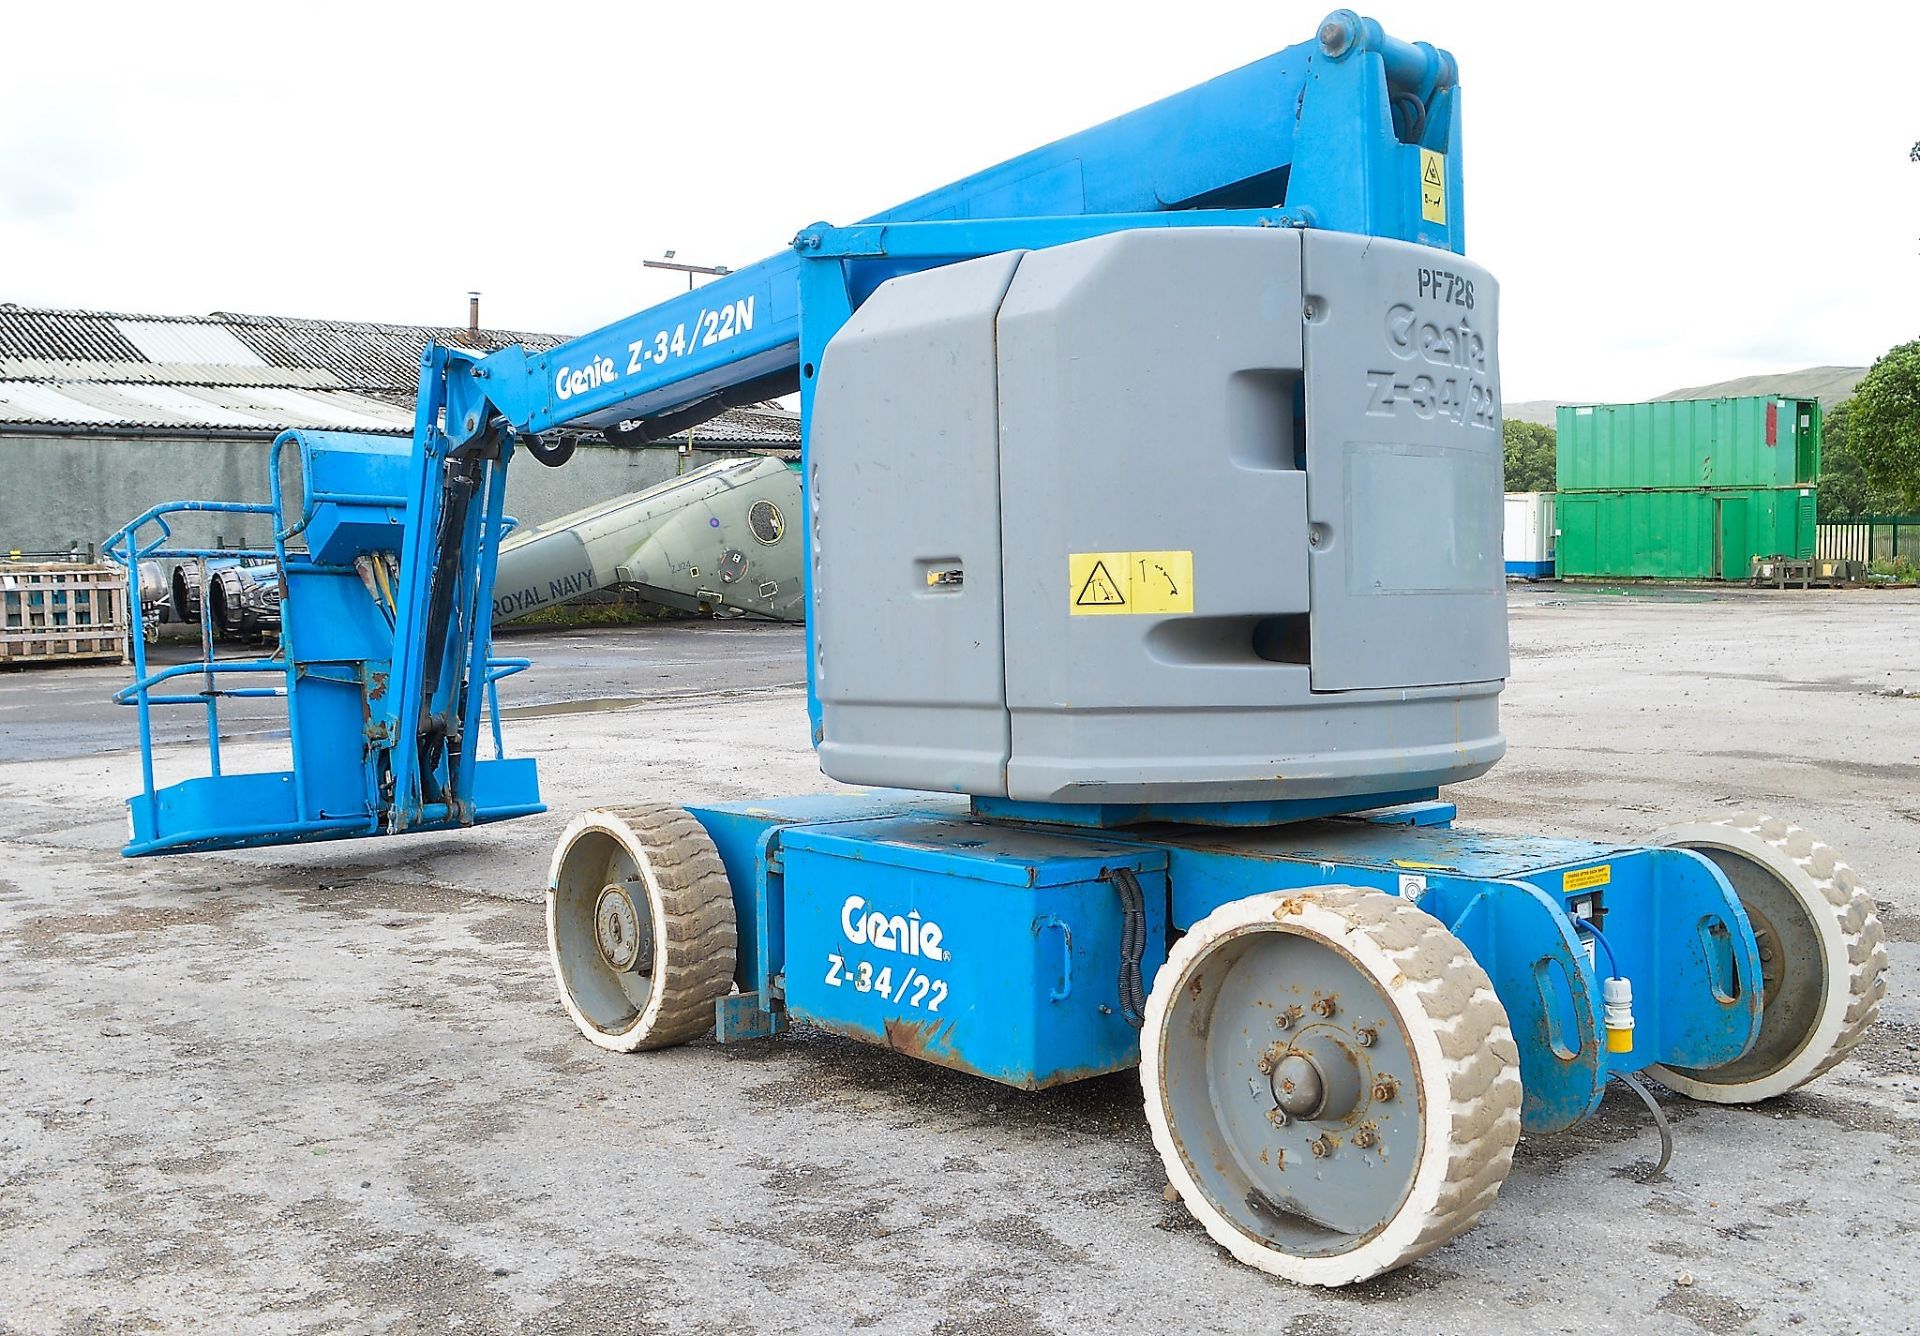 Genie Z-34/22N battery electric articulated boom lift access platform Year: 2007 S/N: N07-6593 - Image 3 of 9